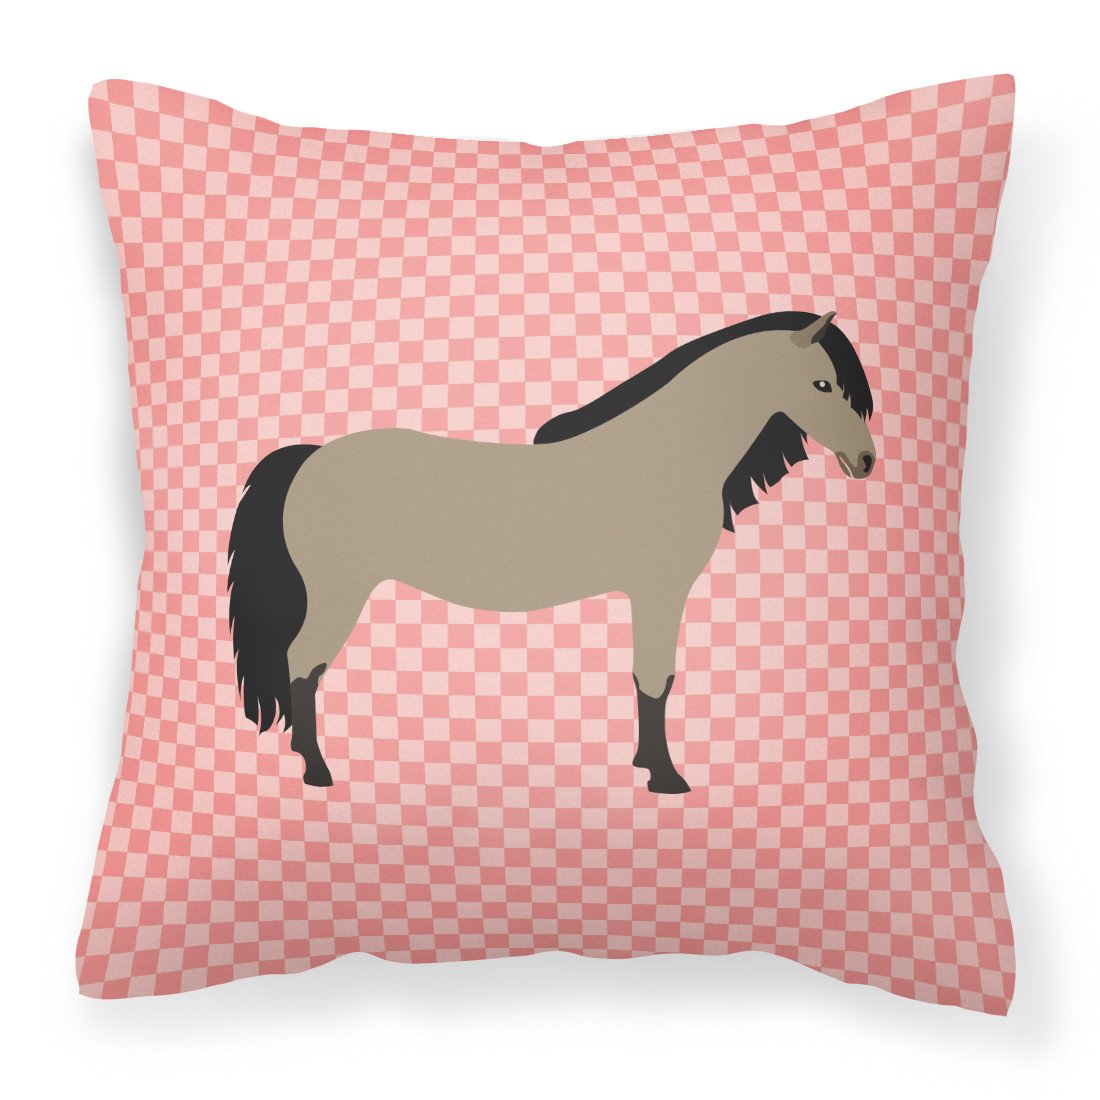 Welsh Pony Horse Pink Check Fabric Decorative Pillow BB7910PW1818 by Caroline's Treasures